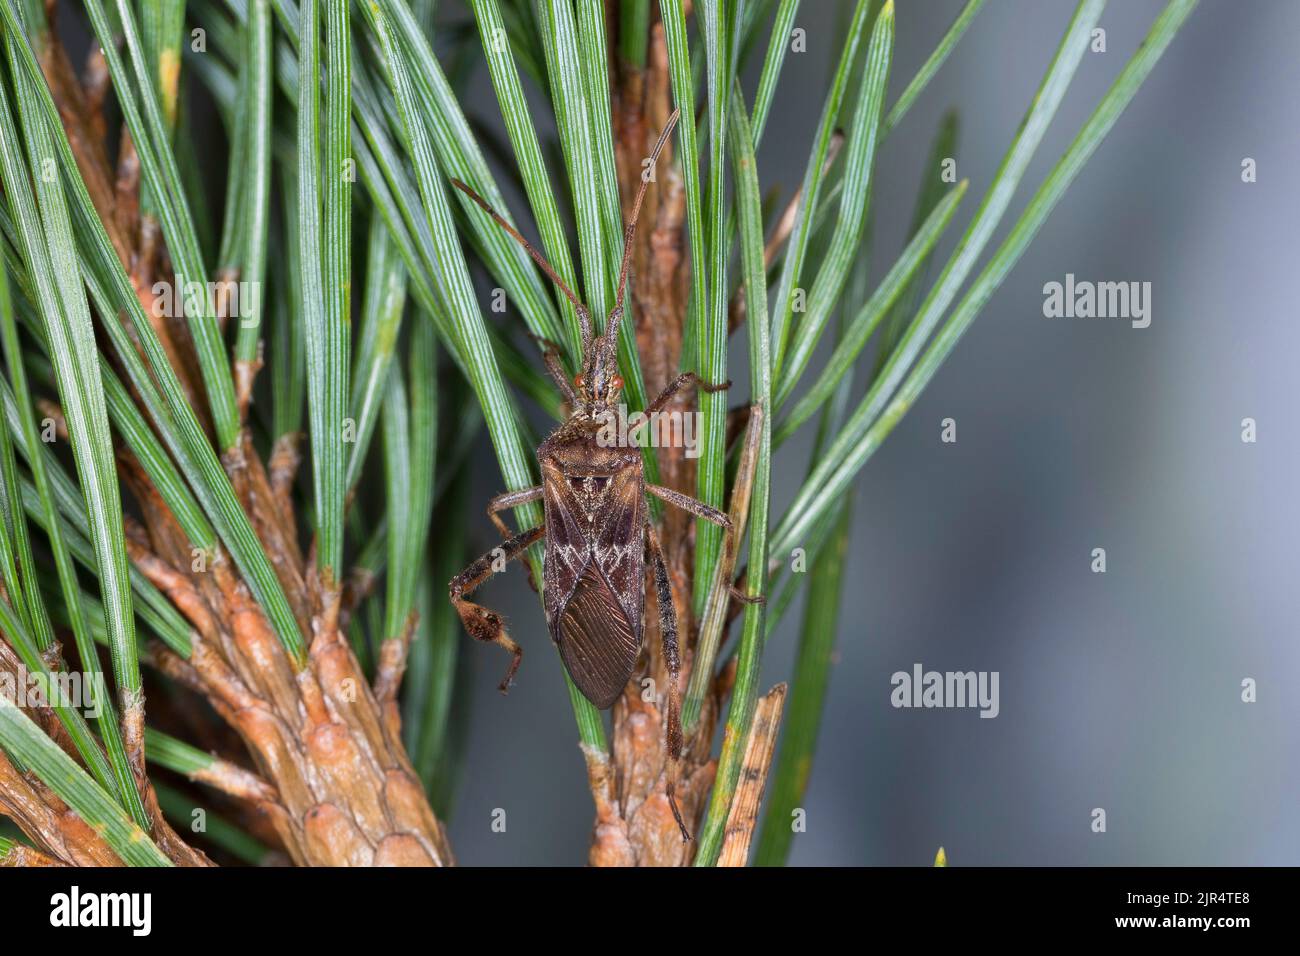 Western conifer seed bug (Leptoglossus occidentalis), sits on a pine twig, Germany Stock Photo